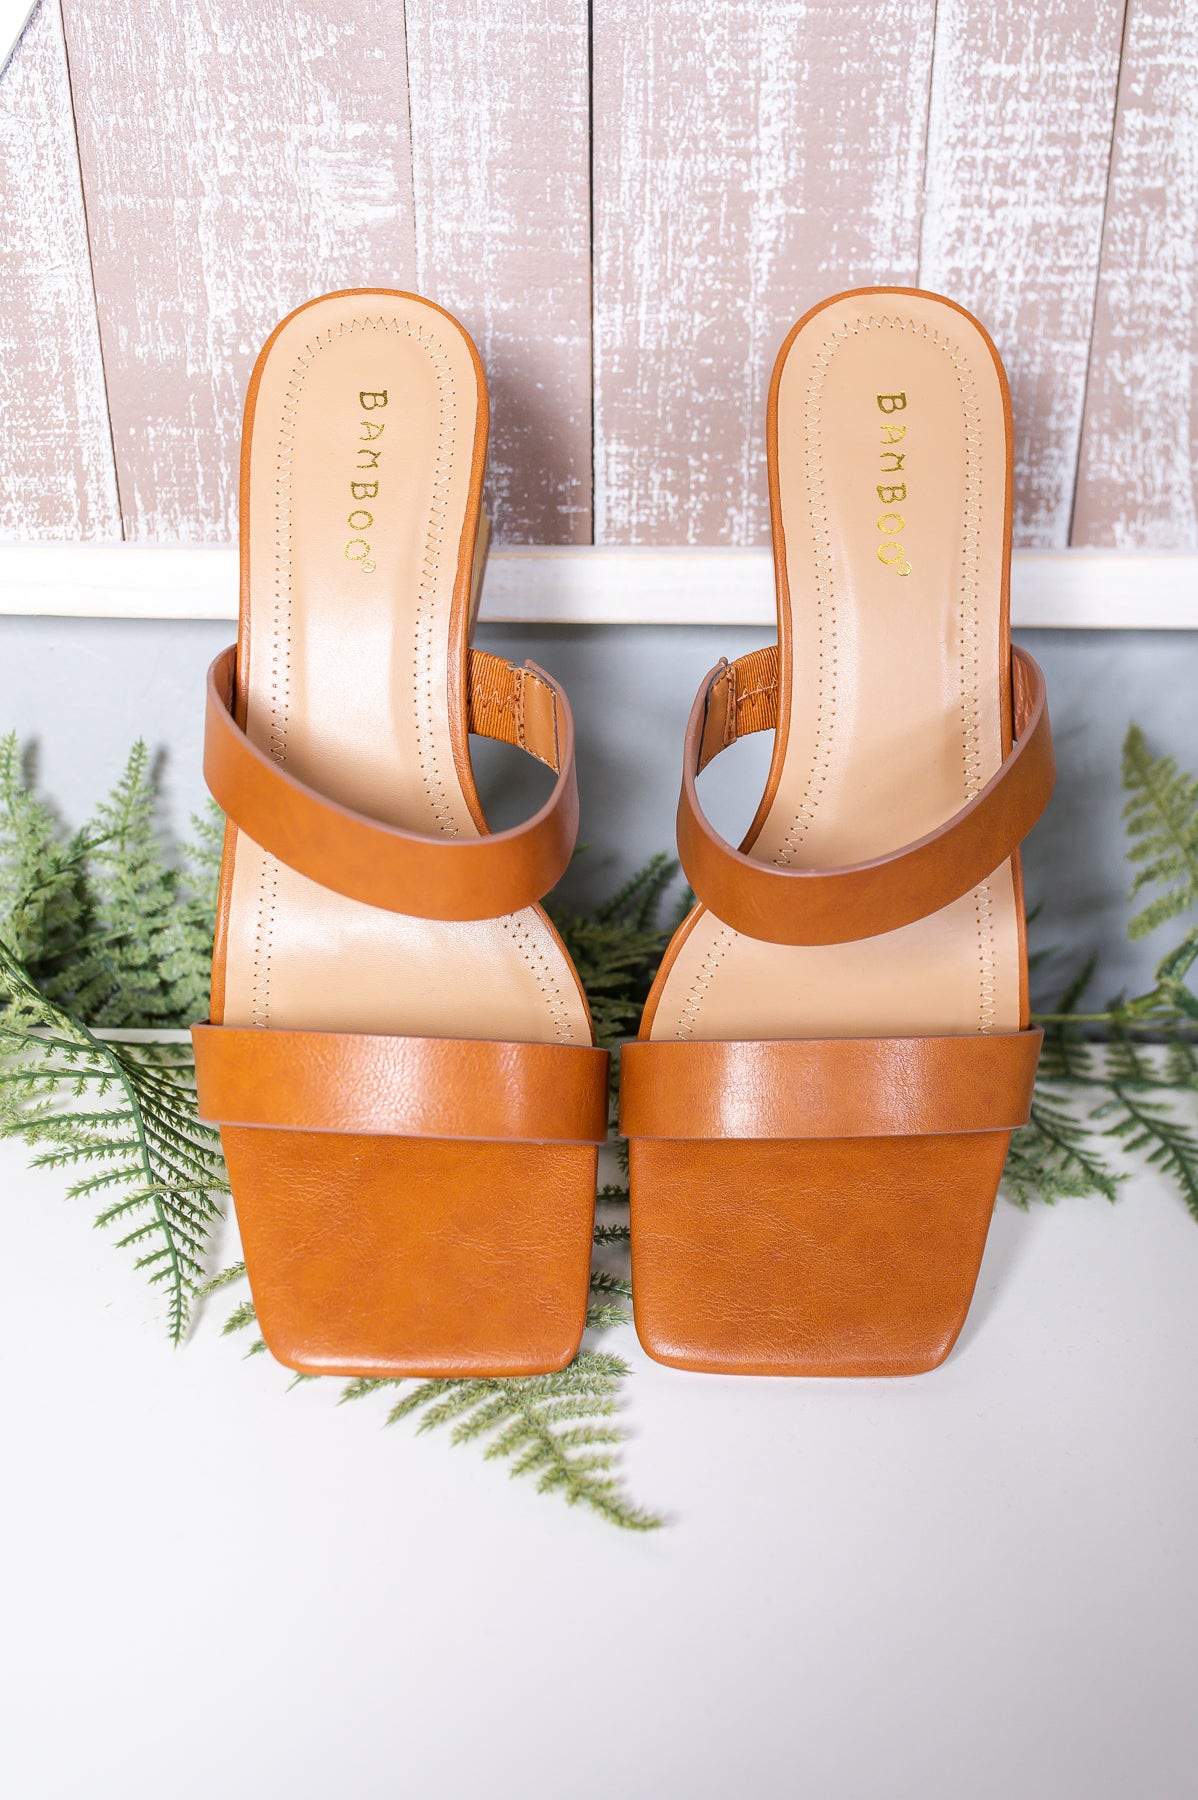 All About Aesthetic Tan Slip On Heels - SHO2536TN